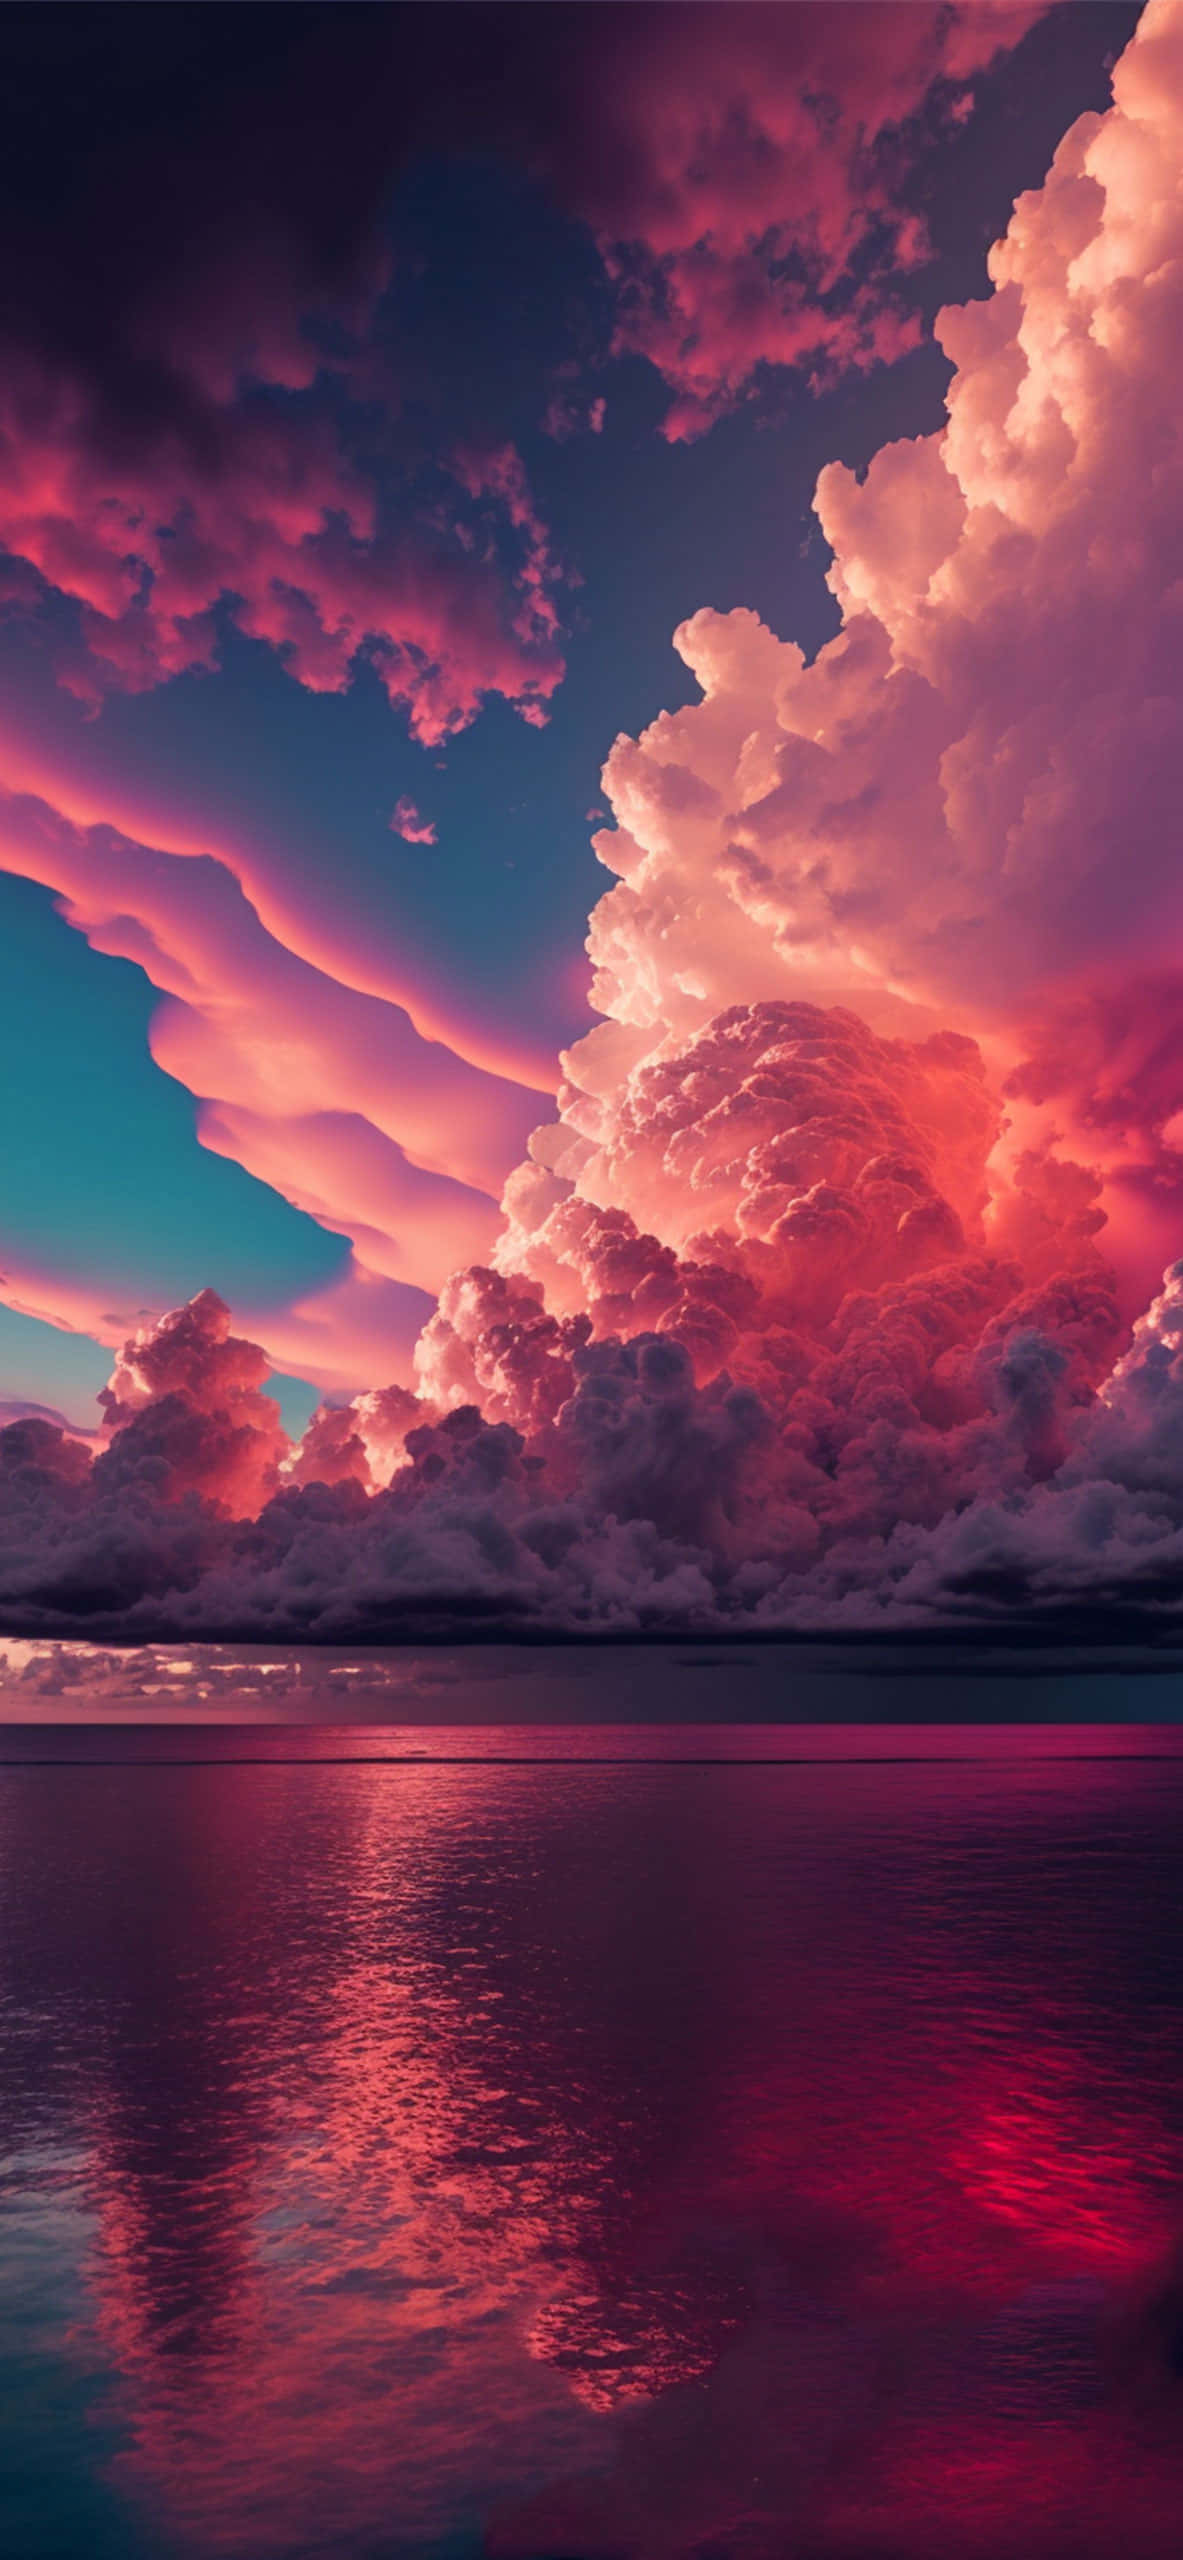 Aesthetic, dreamy sky of fluffy cloudscapes